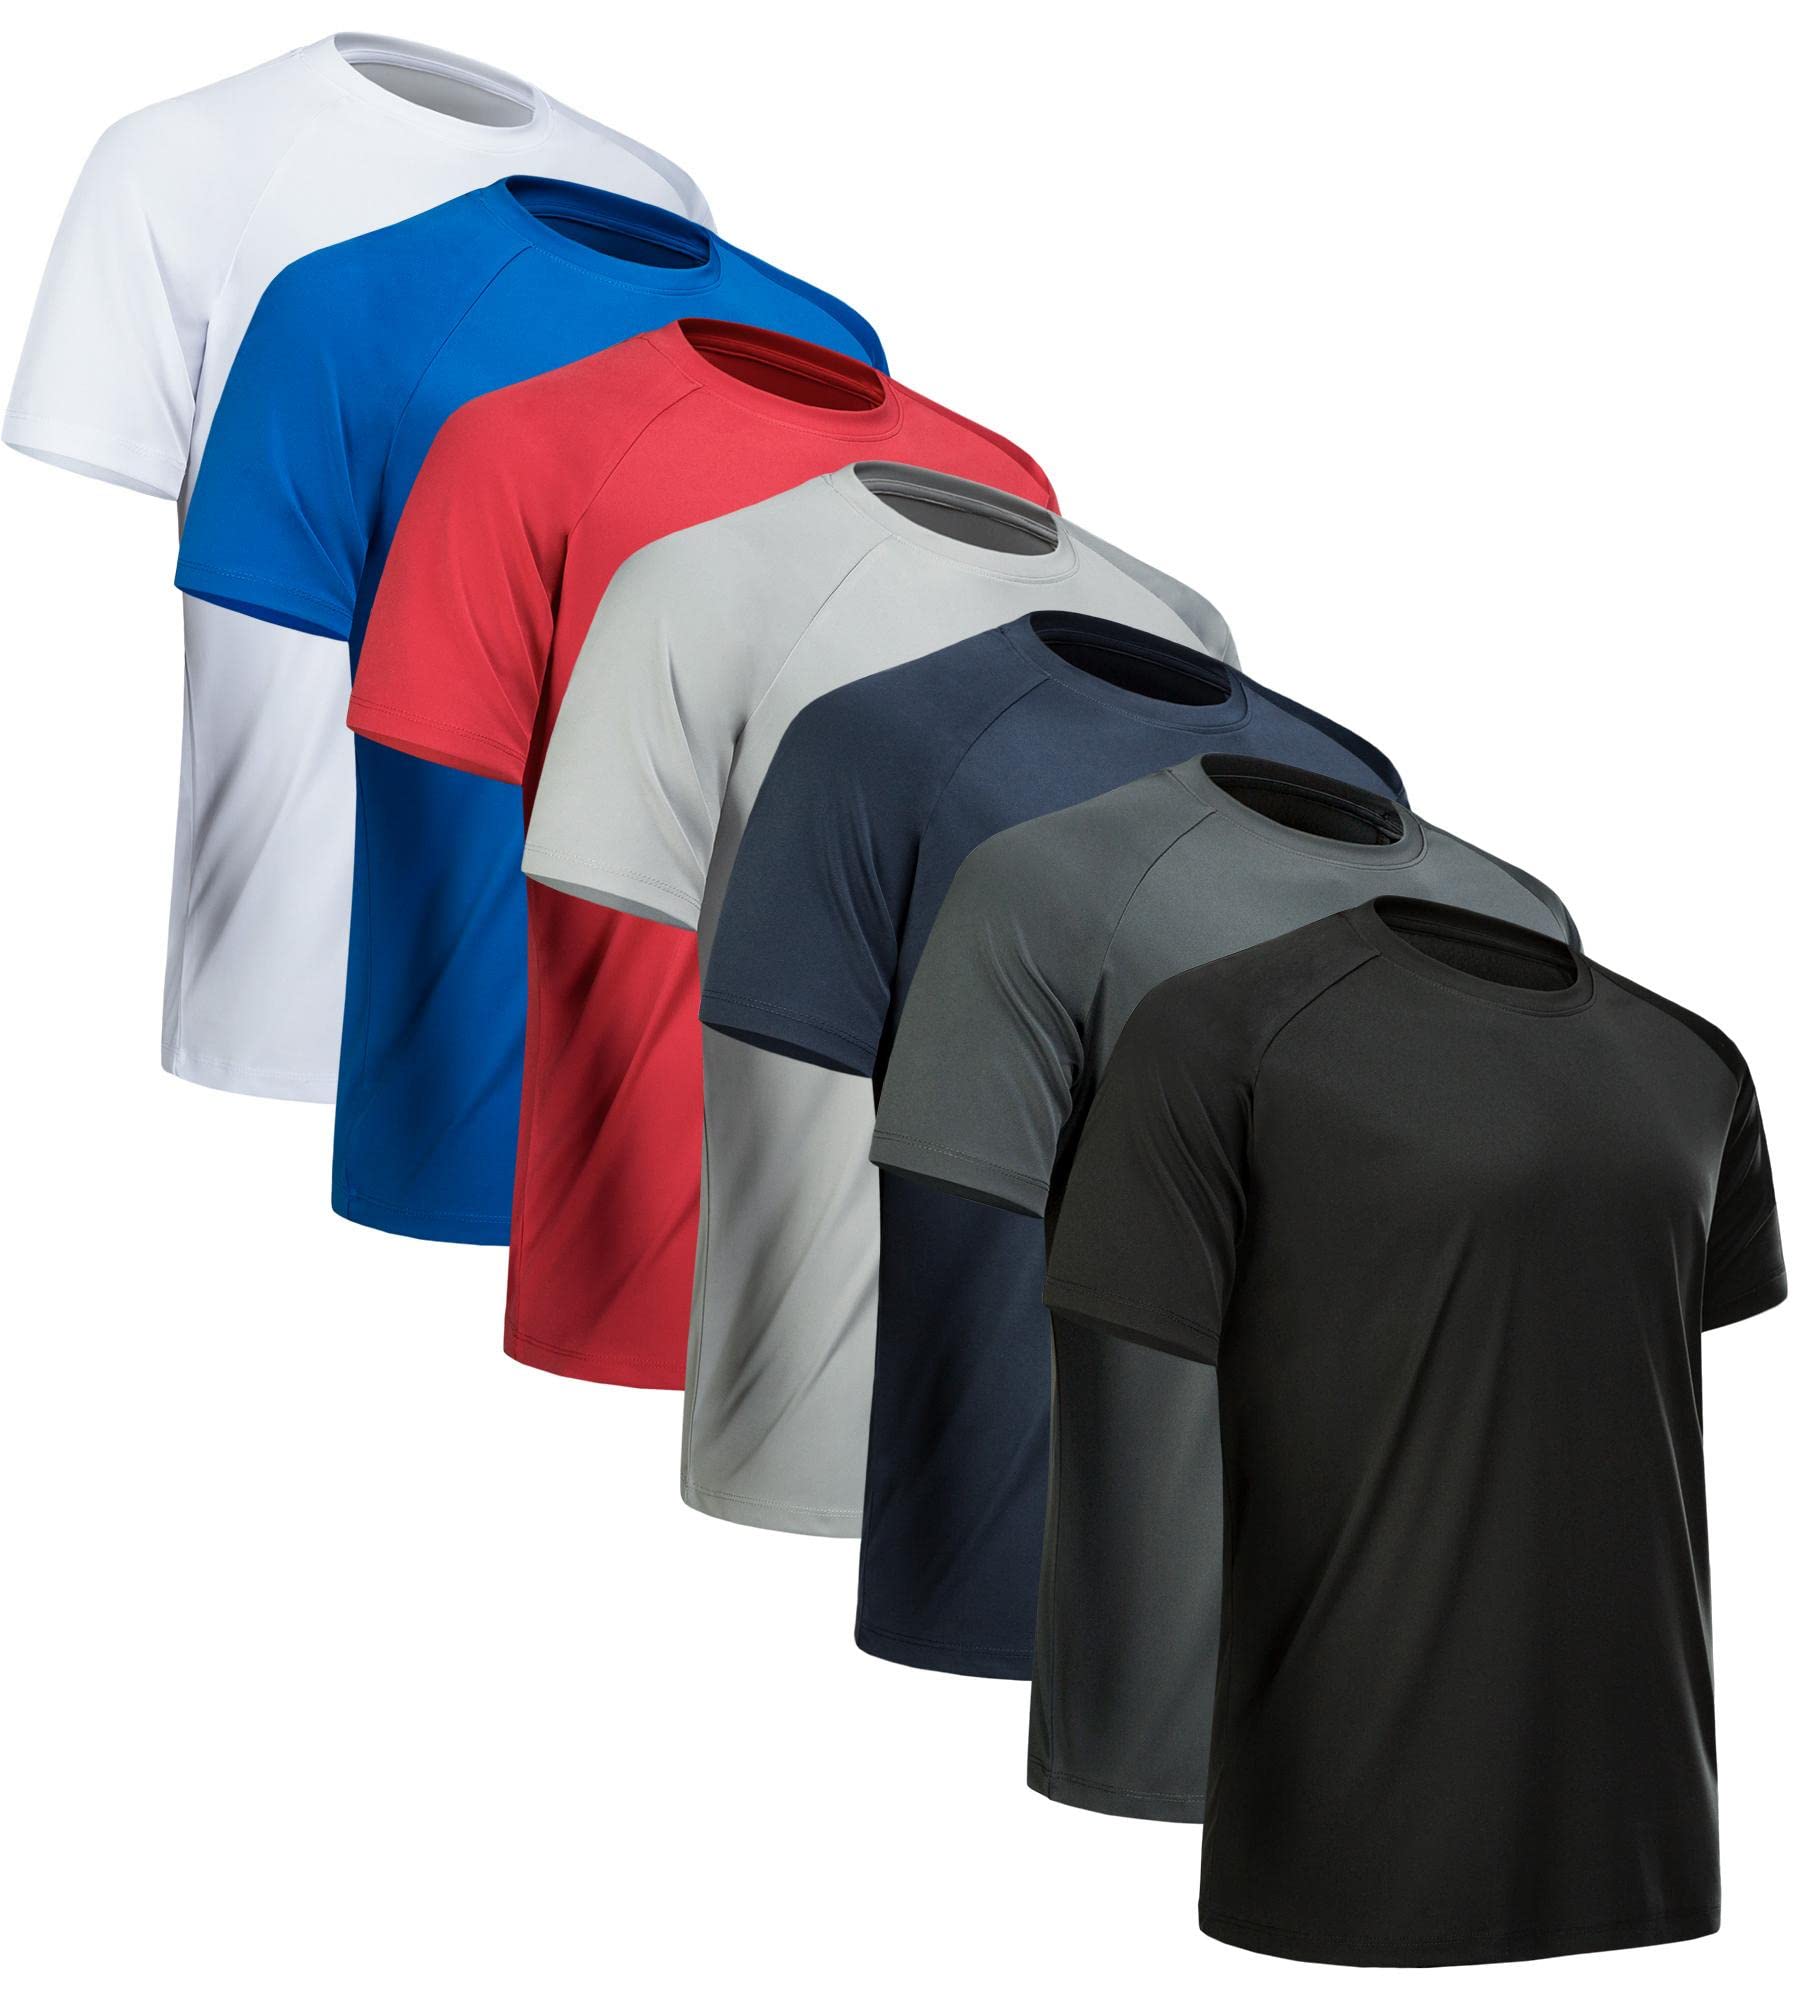 CE CERDR Mens Workout Shirts Quick Dry Performance Short Sleeve Athletic Shirt